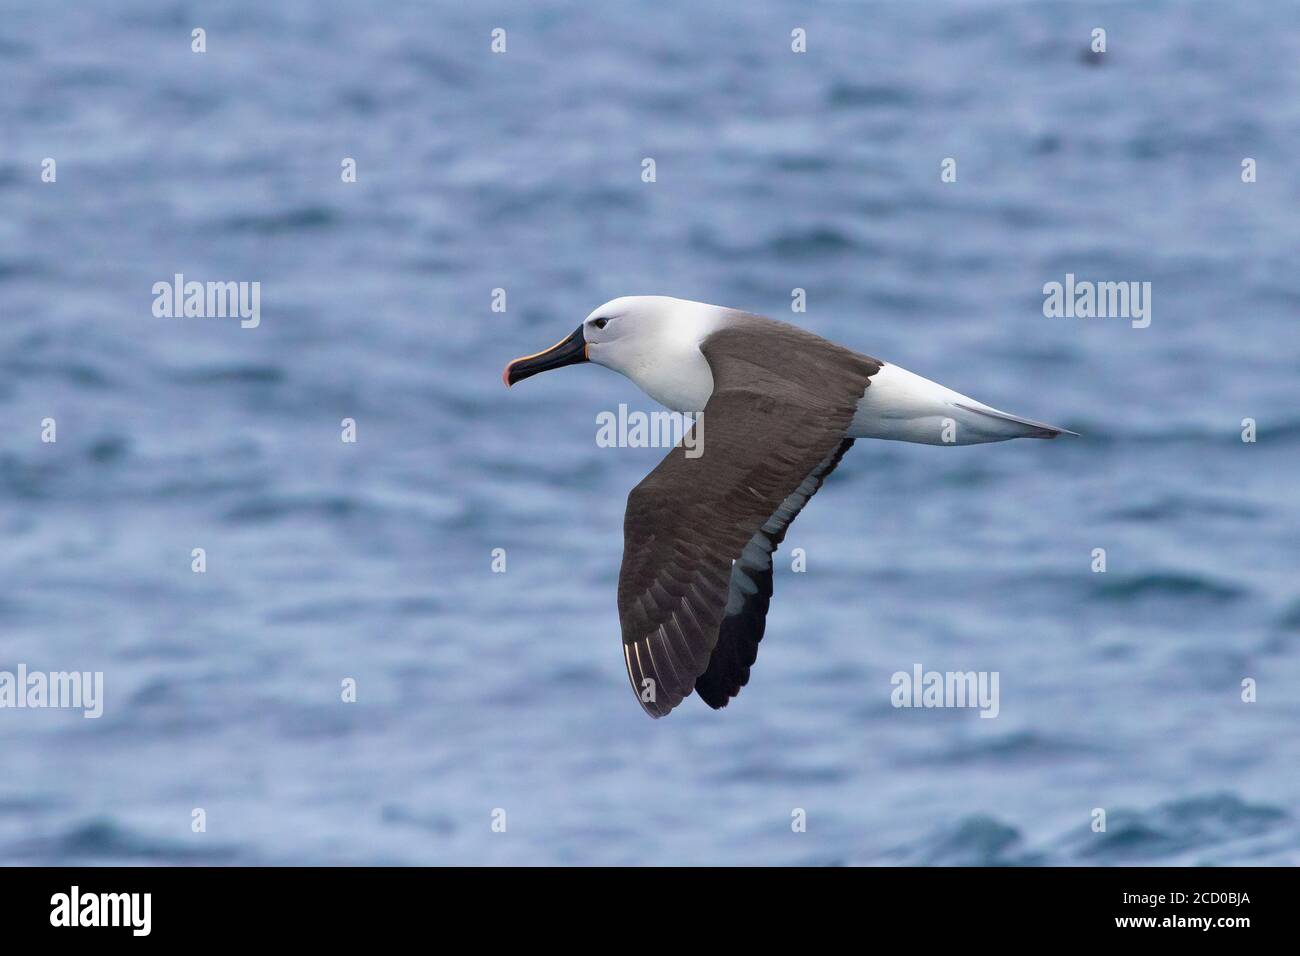 Atlantic Yellow-nosed Albatross (Talassarche chlororhynchos), adult in flight showing upperparts, Western Cape, South Africa Stock Photo